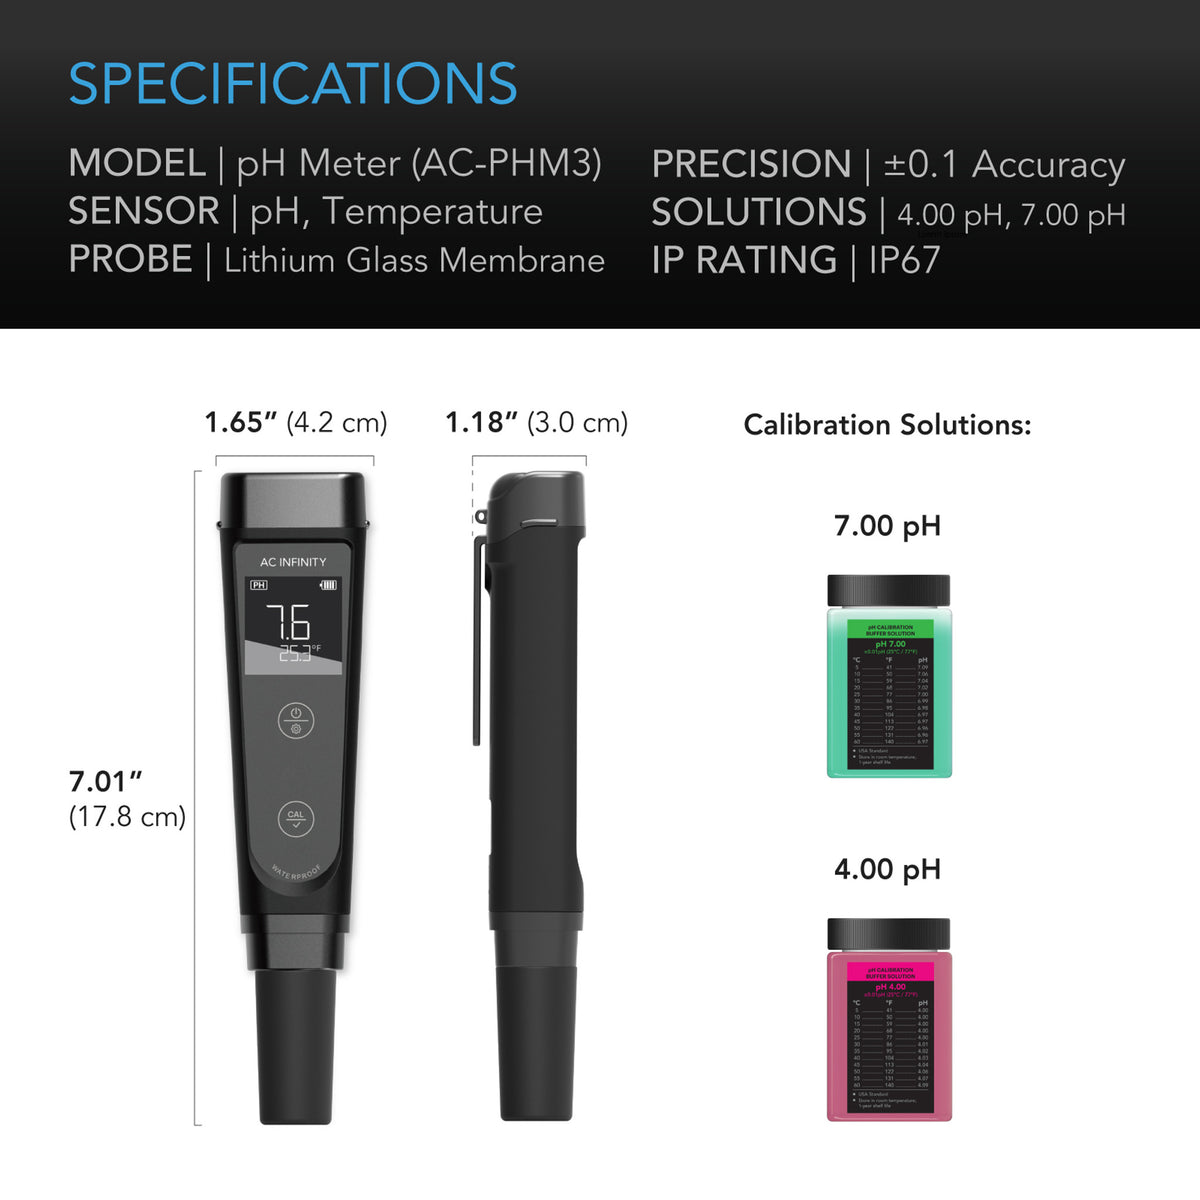 PH Meter Specifications by AC Infinity